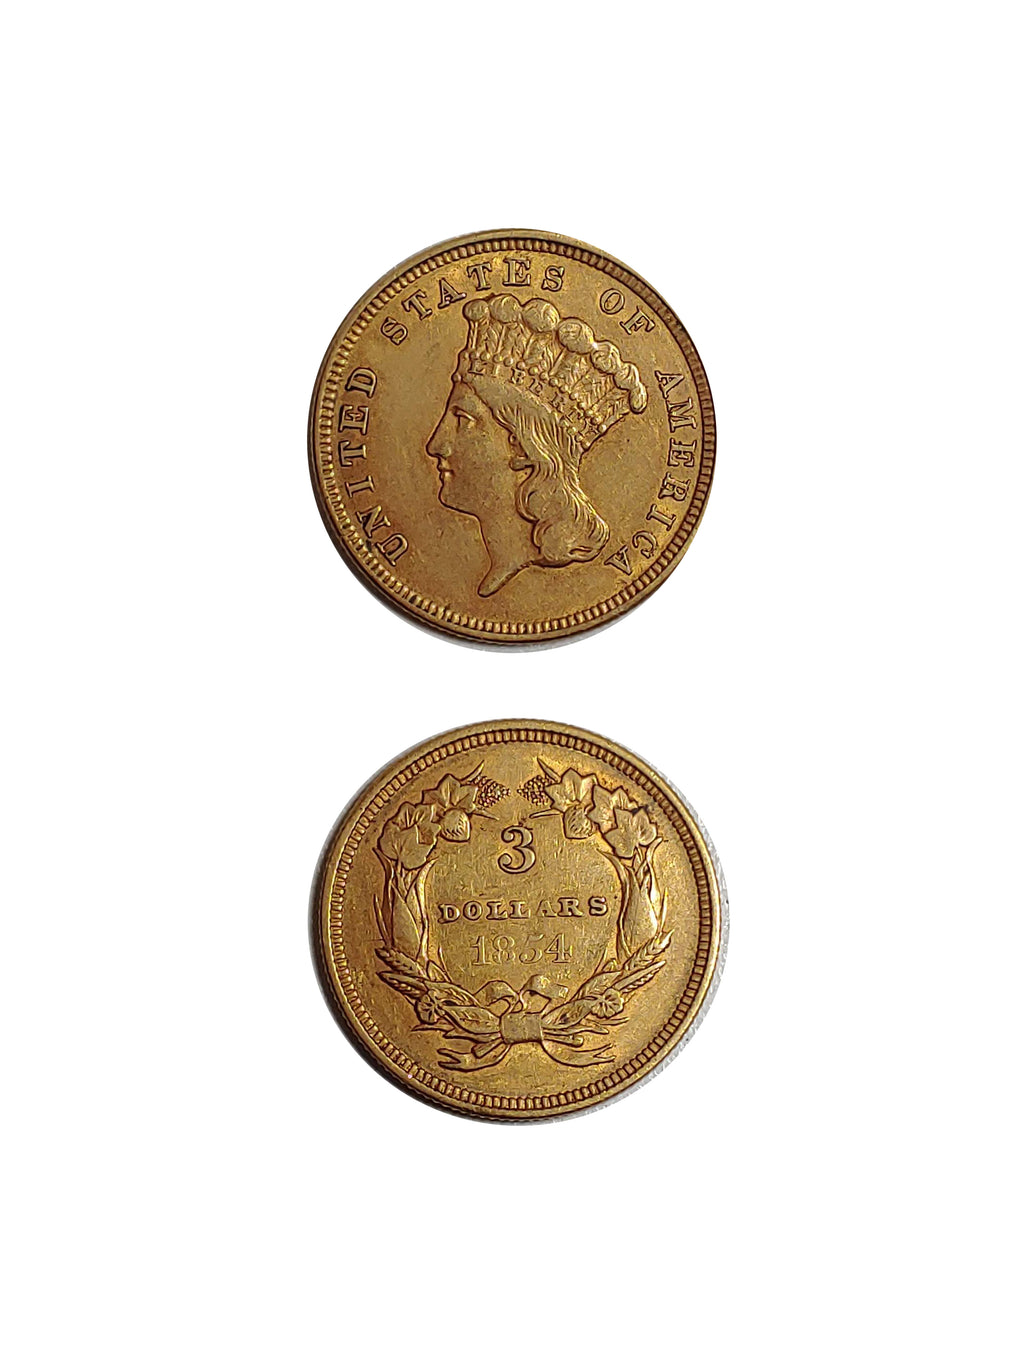 1854 Indian Princess Head Gold $3 Three Dollar Piece - Early Gold Coins  Coin Value Prices, Photos & Info